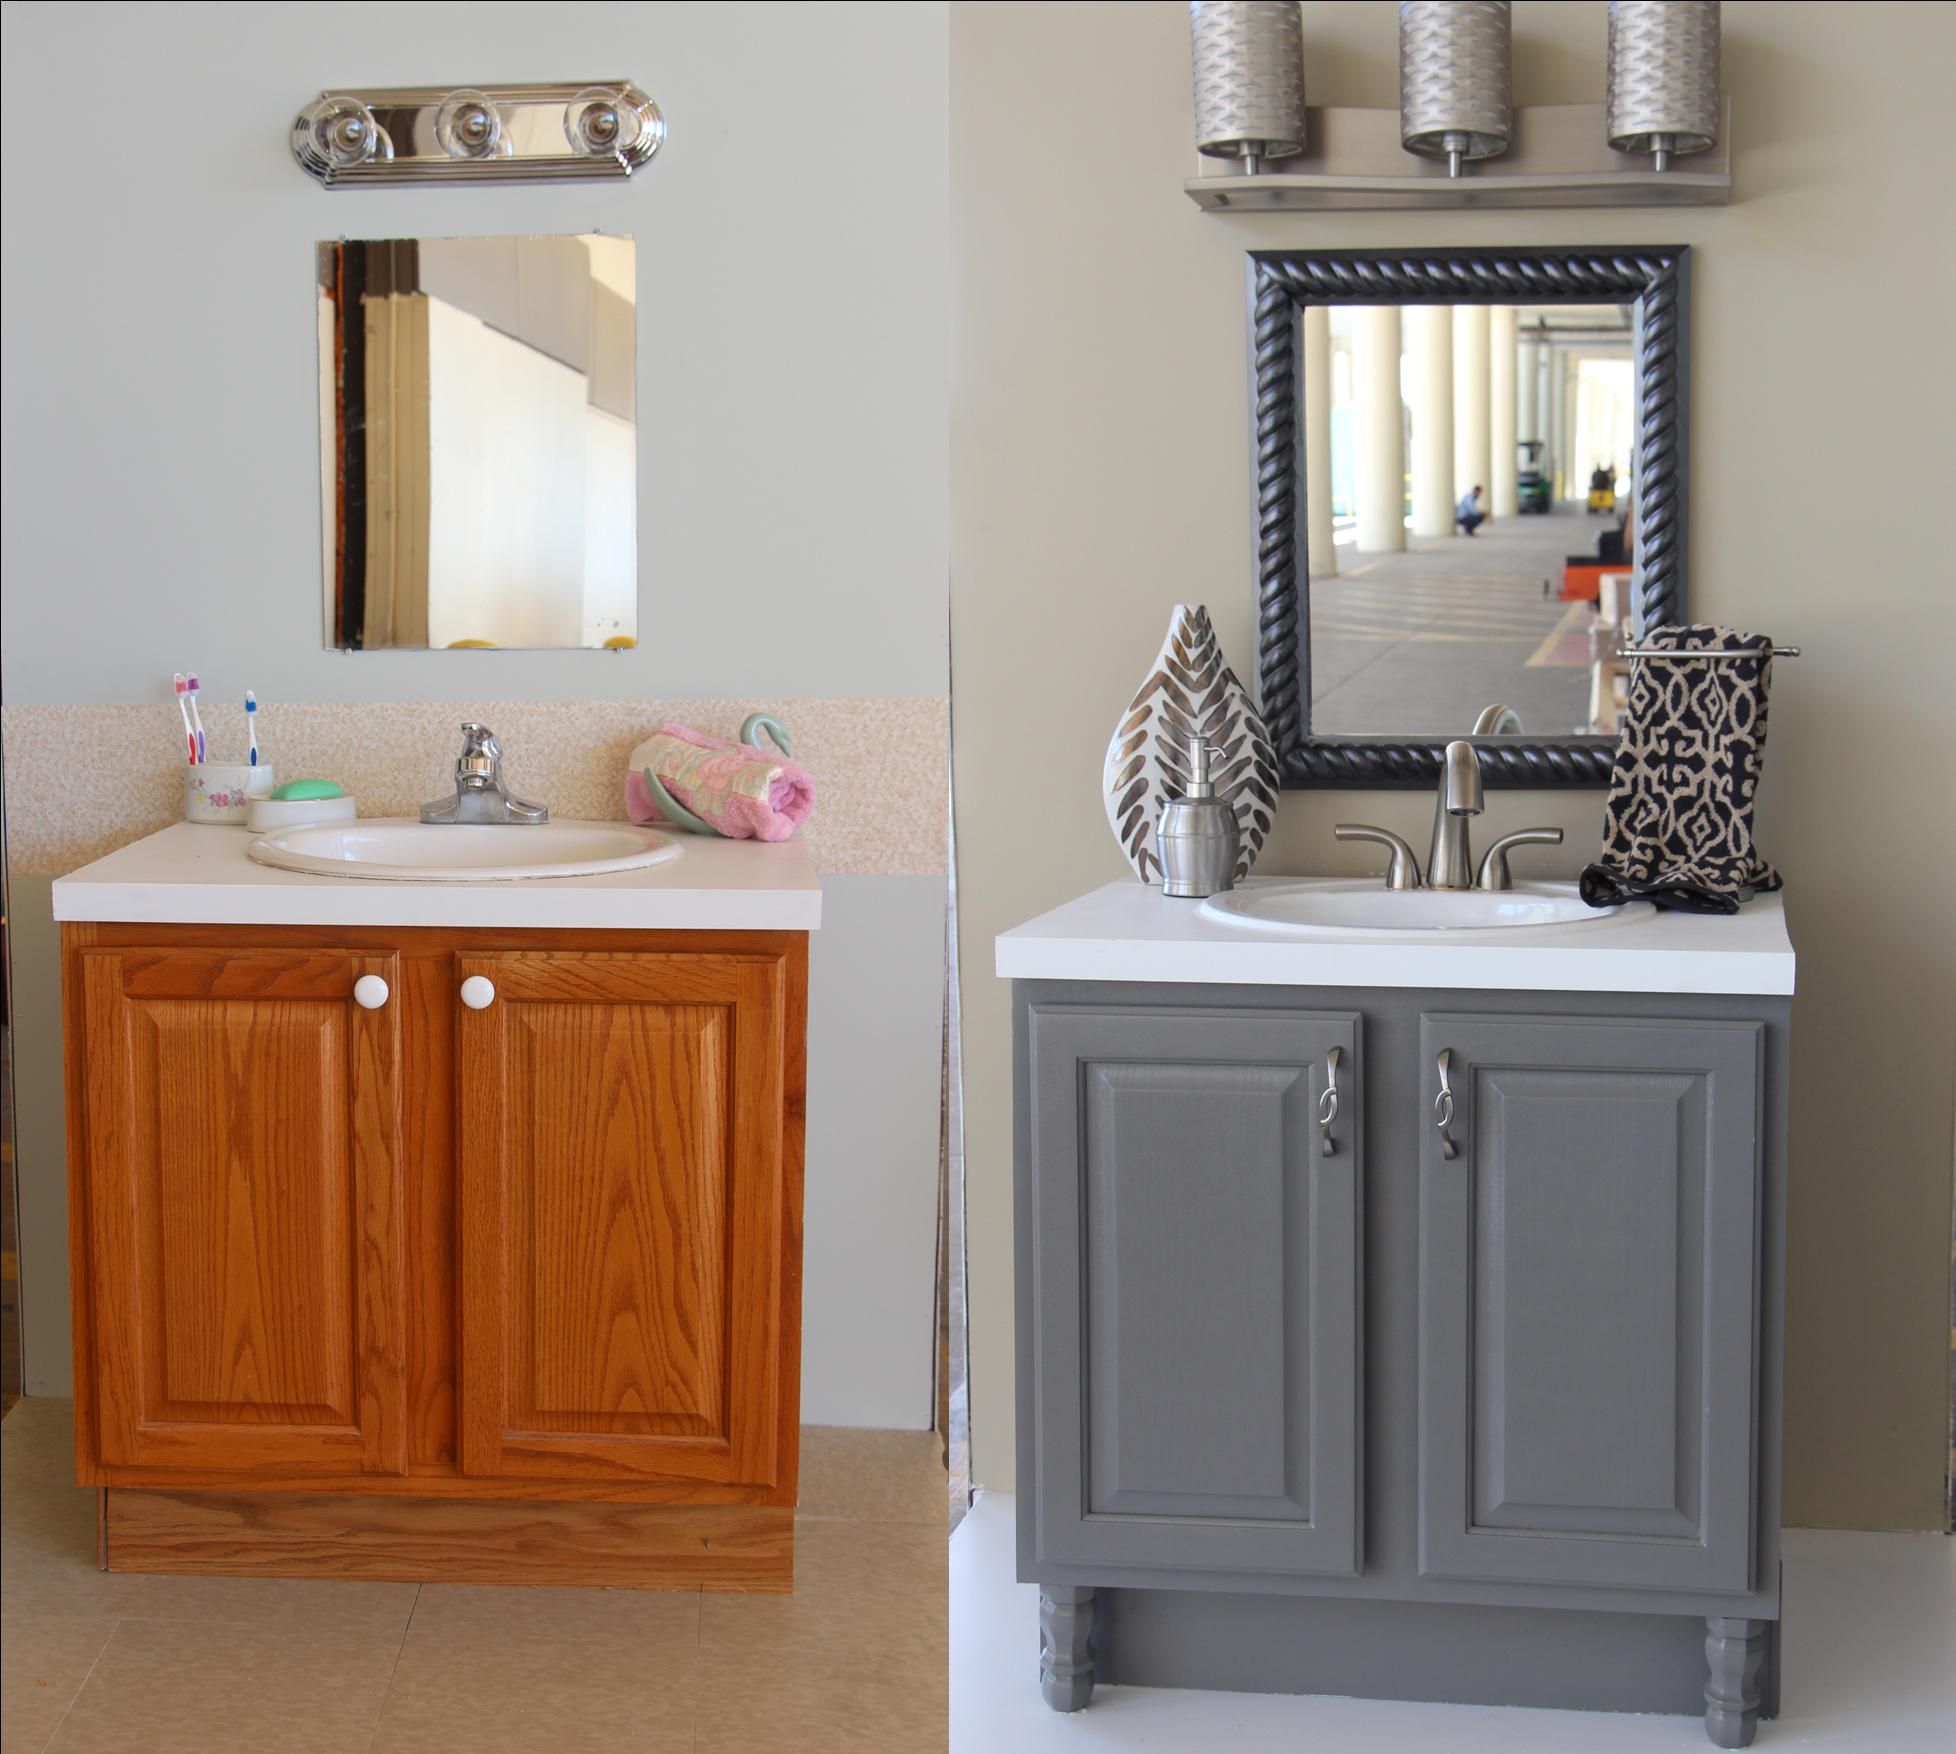 How to paint a washbasin quickly and
stress-free